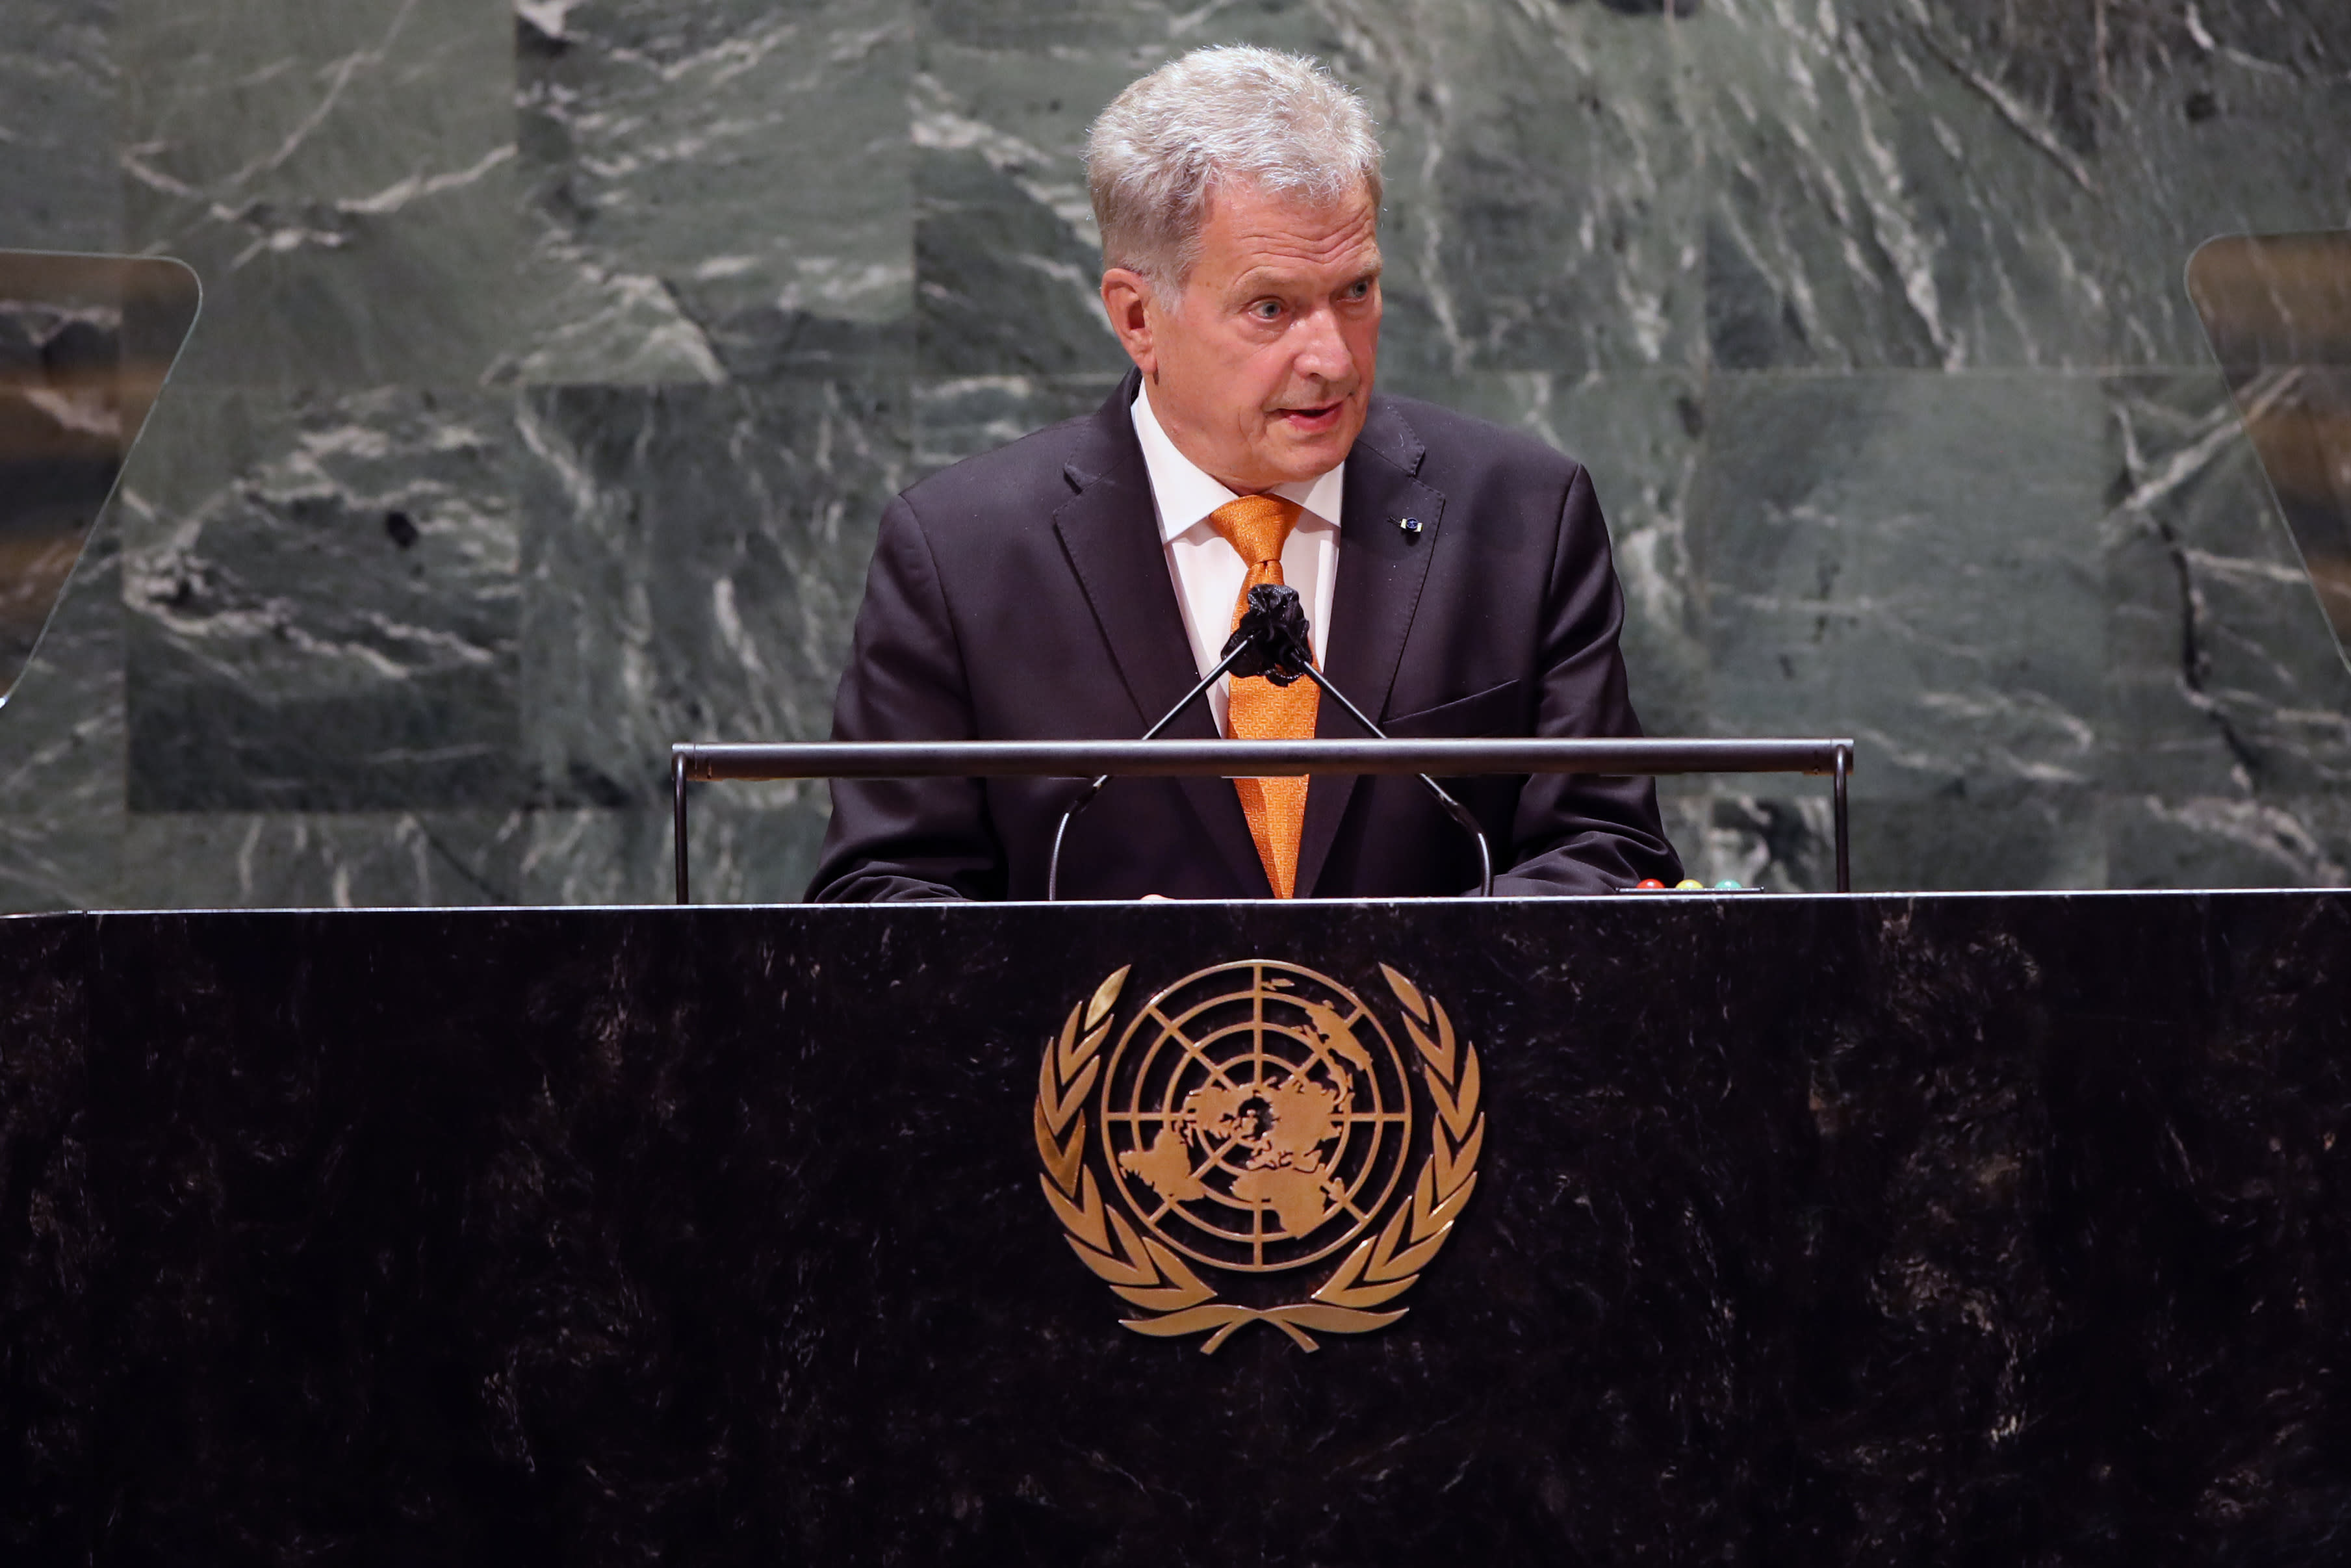 Niinistö heads to New York for his last UN speech as President of Finland